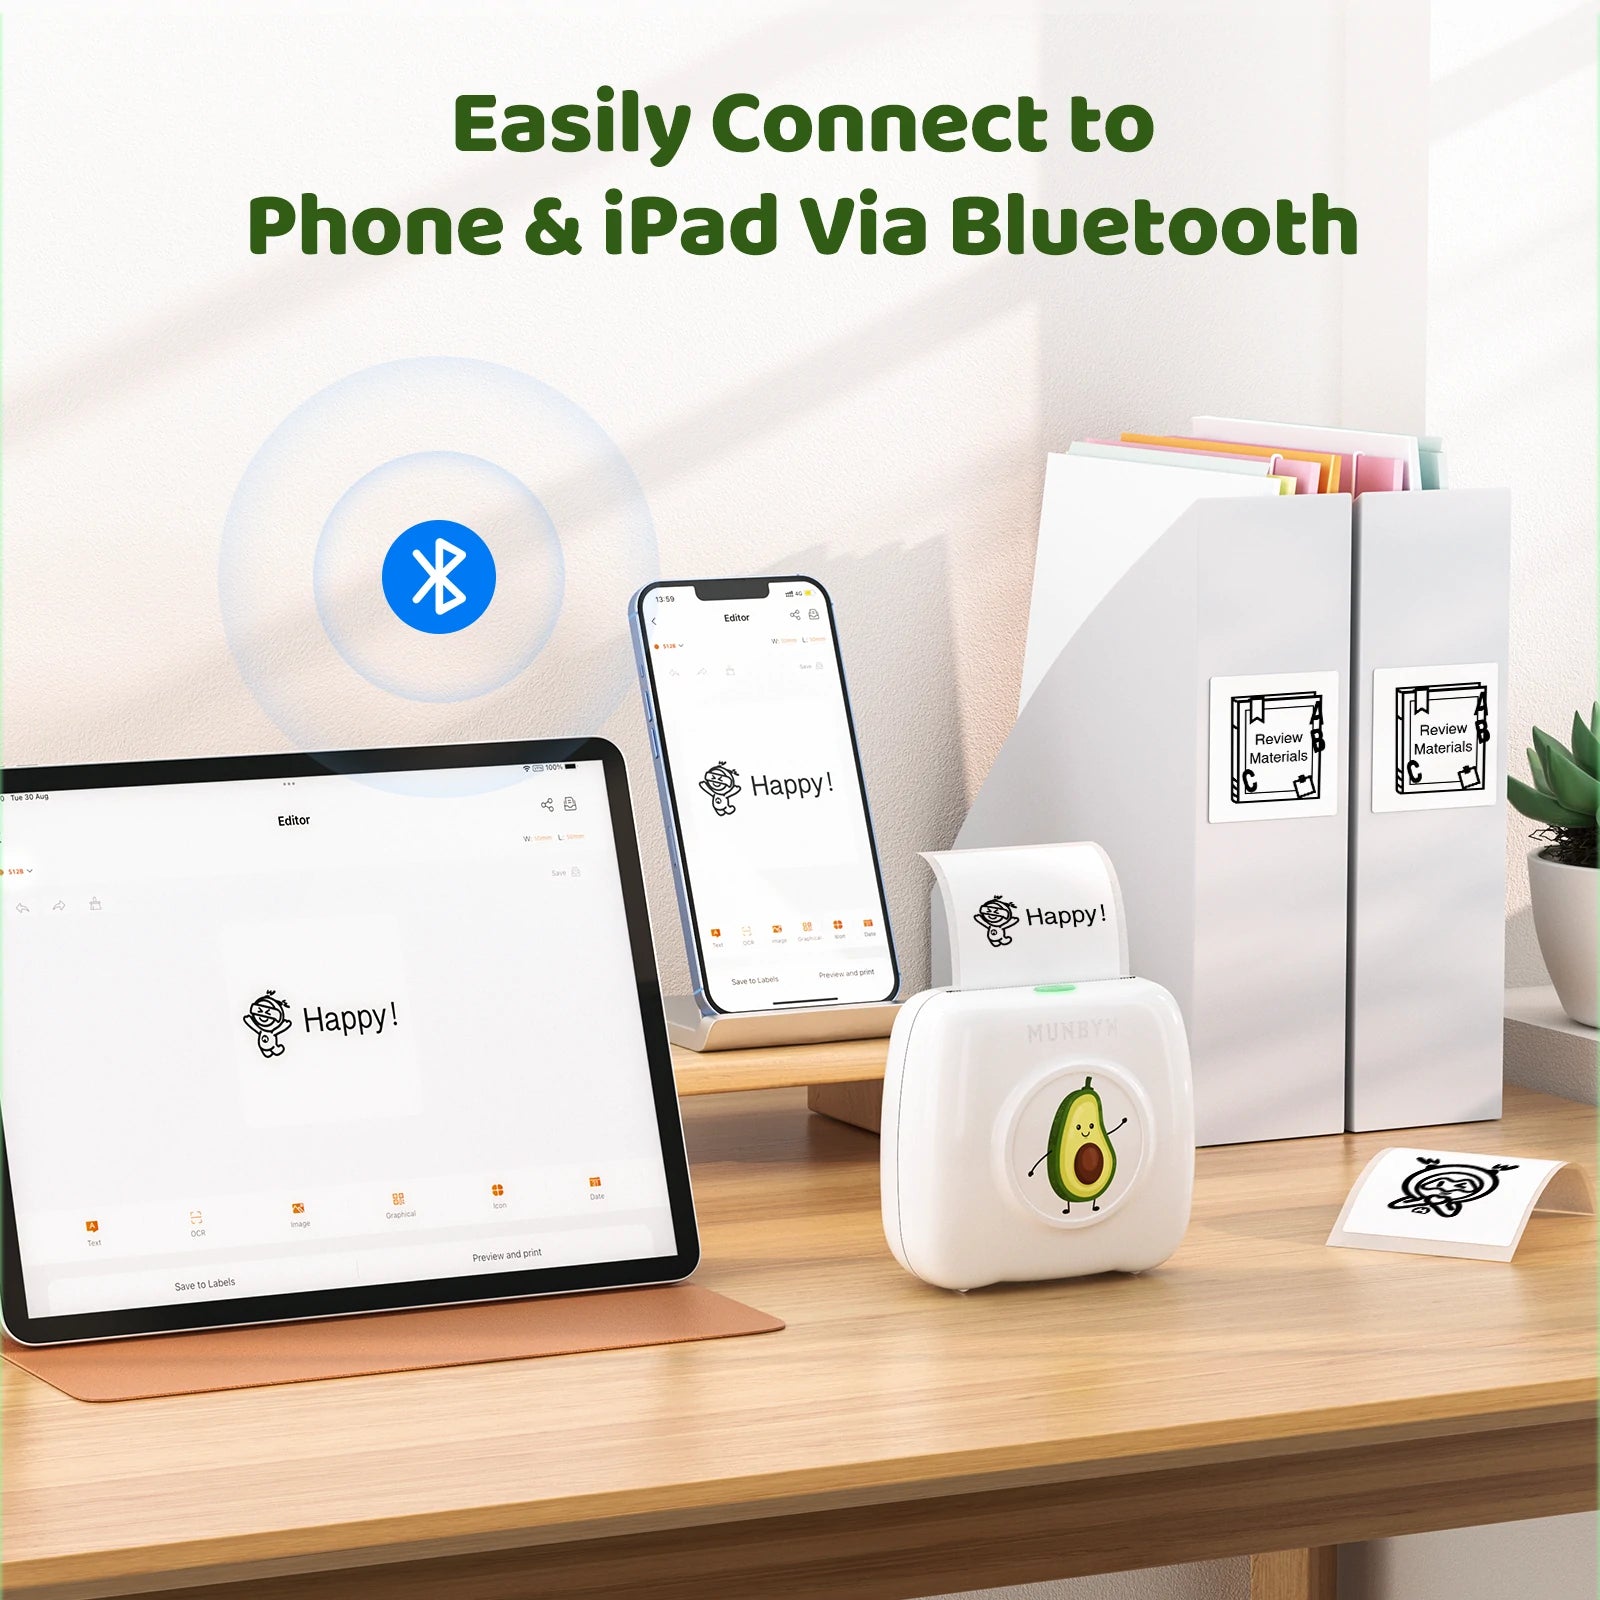 With the convenience of Bluetooth connection, you can print anywhere and anytime with just a few taps on your device.